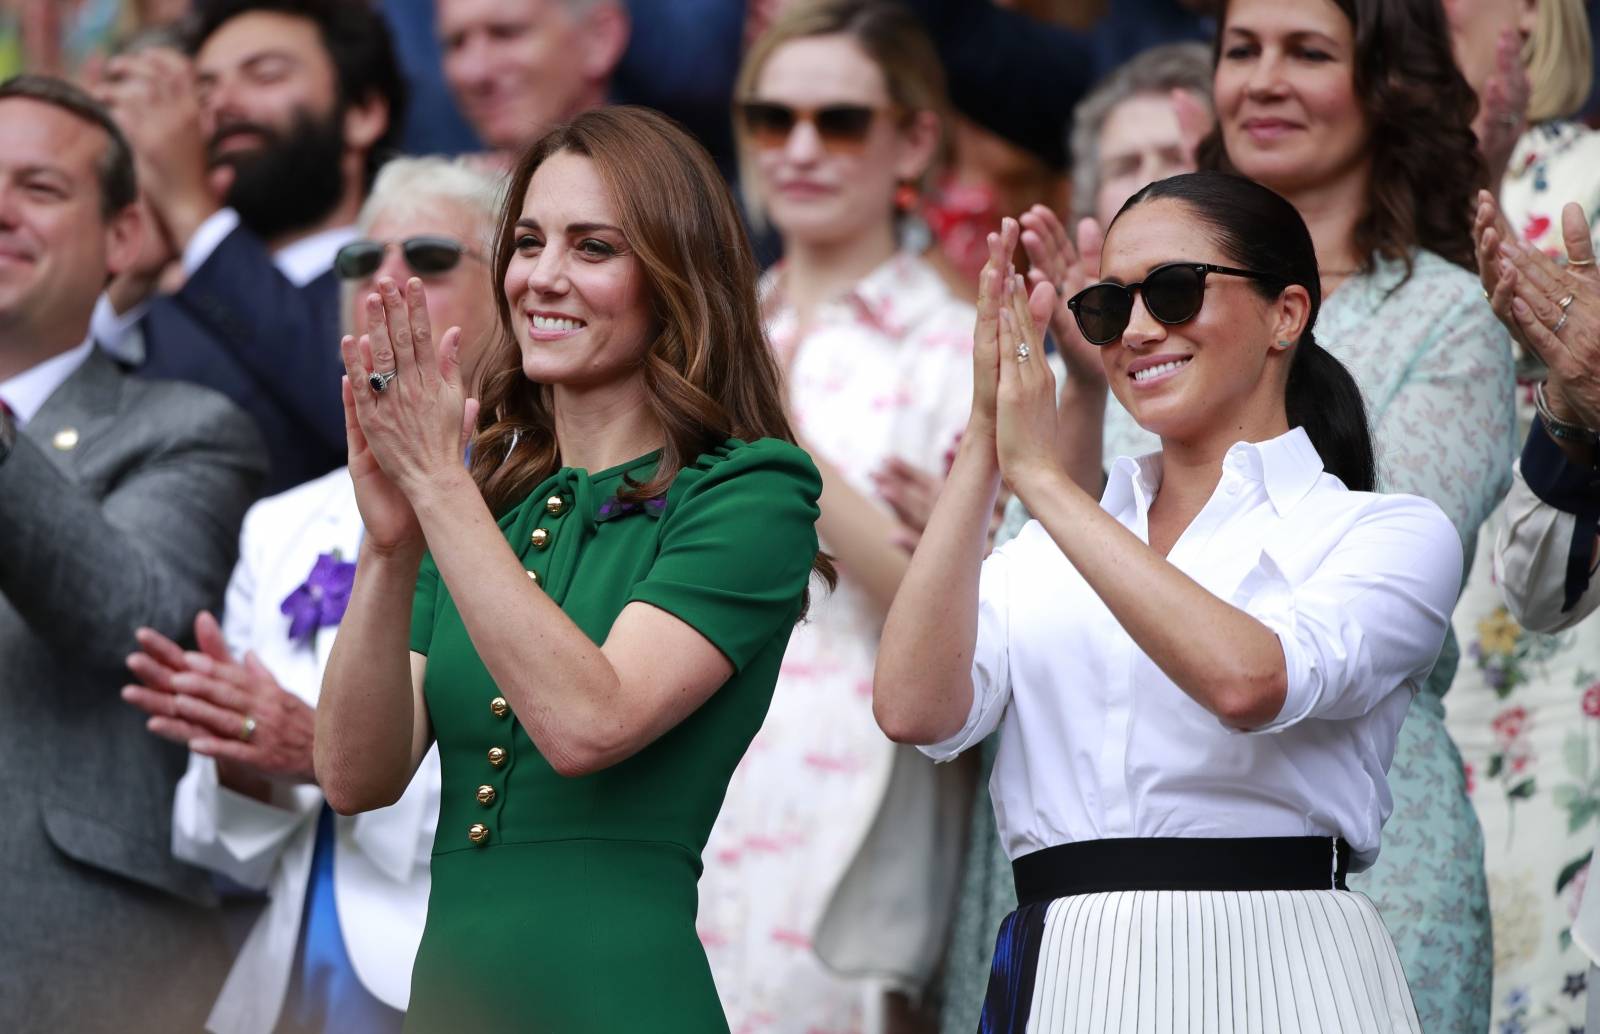 Kate Middleton, the Duchess of Cambridge, Meghan Markle, the Duchess of Sussex and Pippa MIddleton watch the Ladies Singles Final between Serena Williams and Simona Halep at The Wimbledon Championships tennis, Wimbledon, London on July 13, 2019